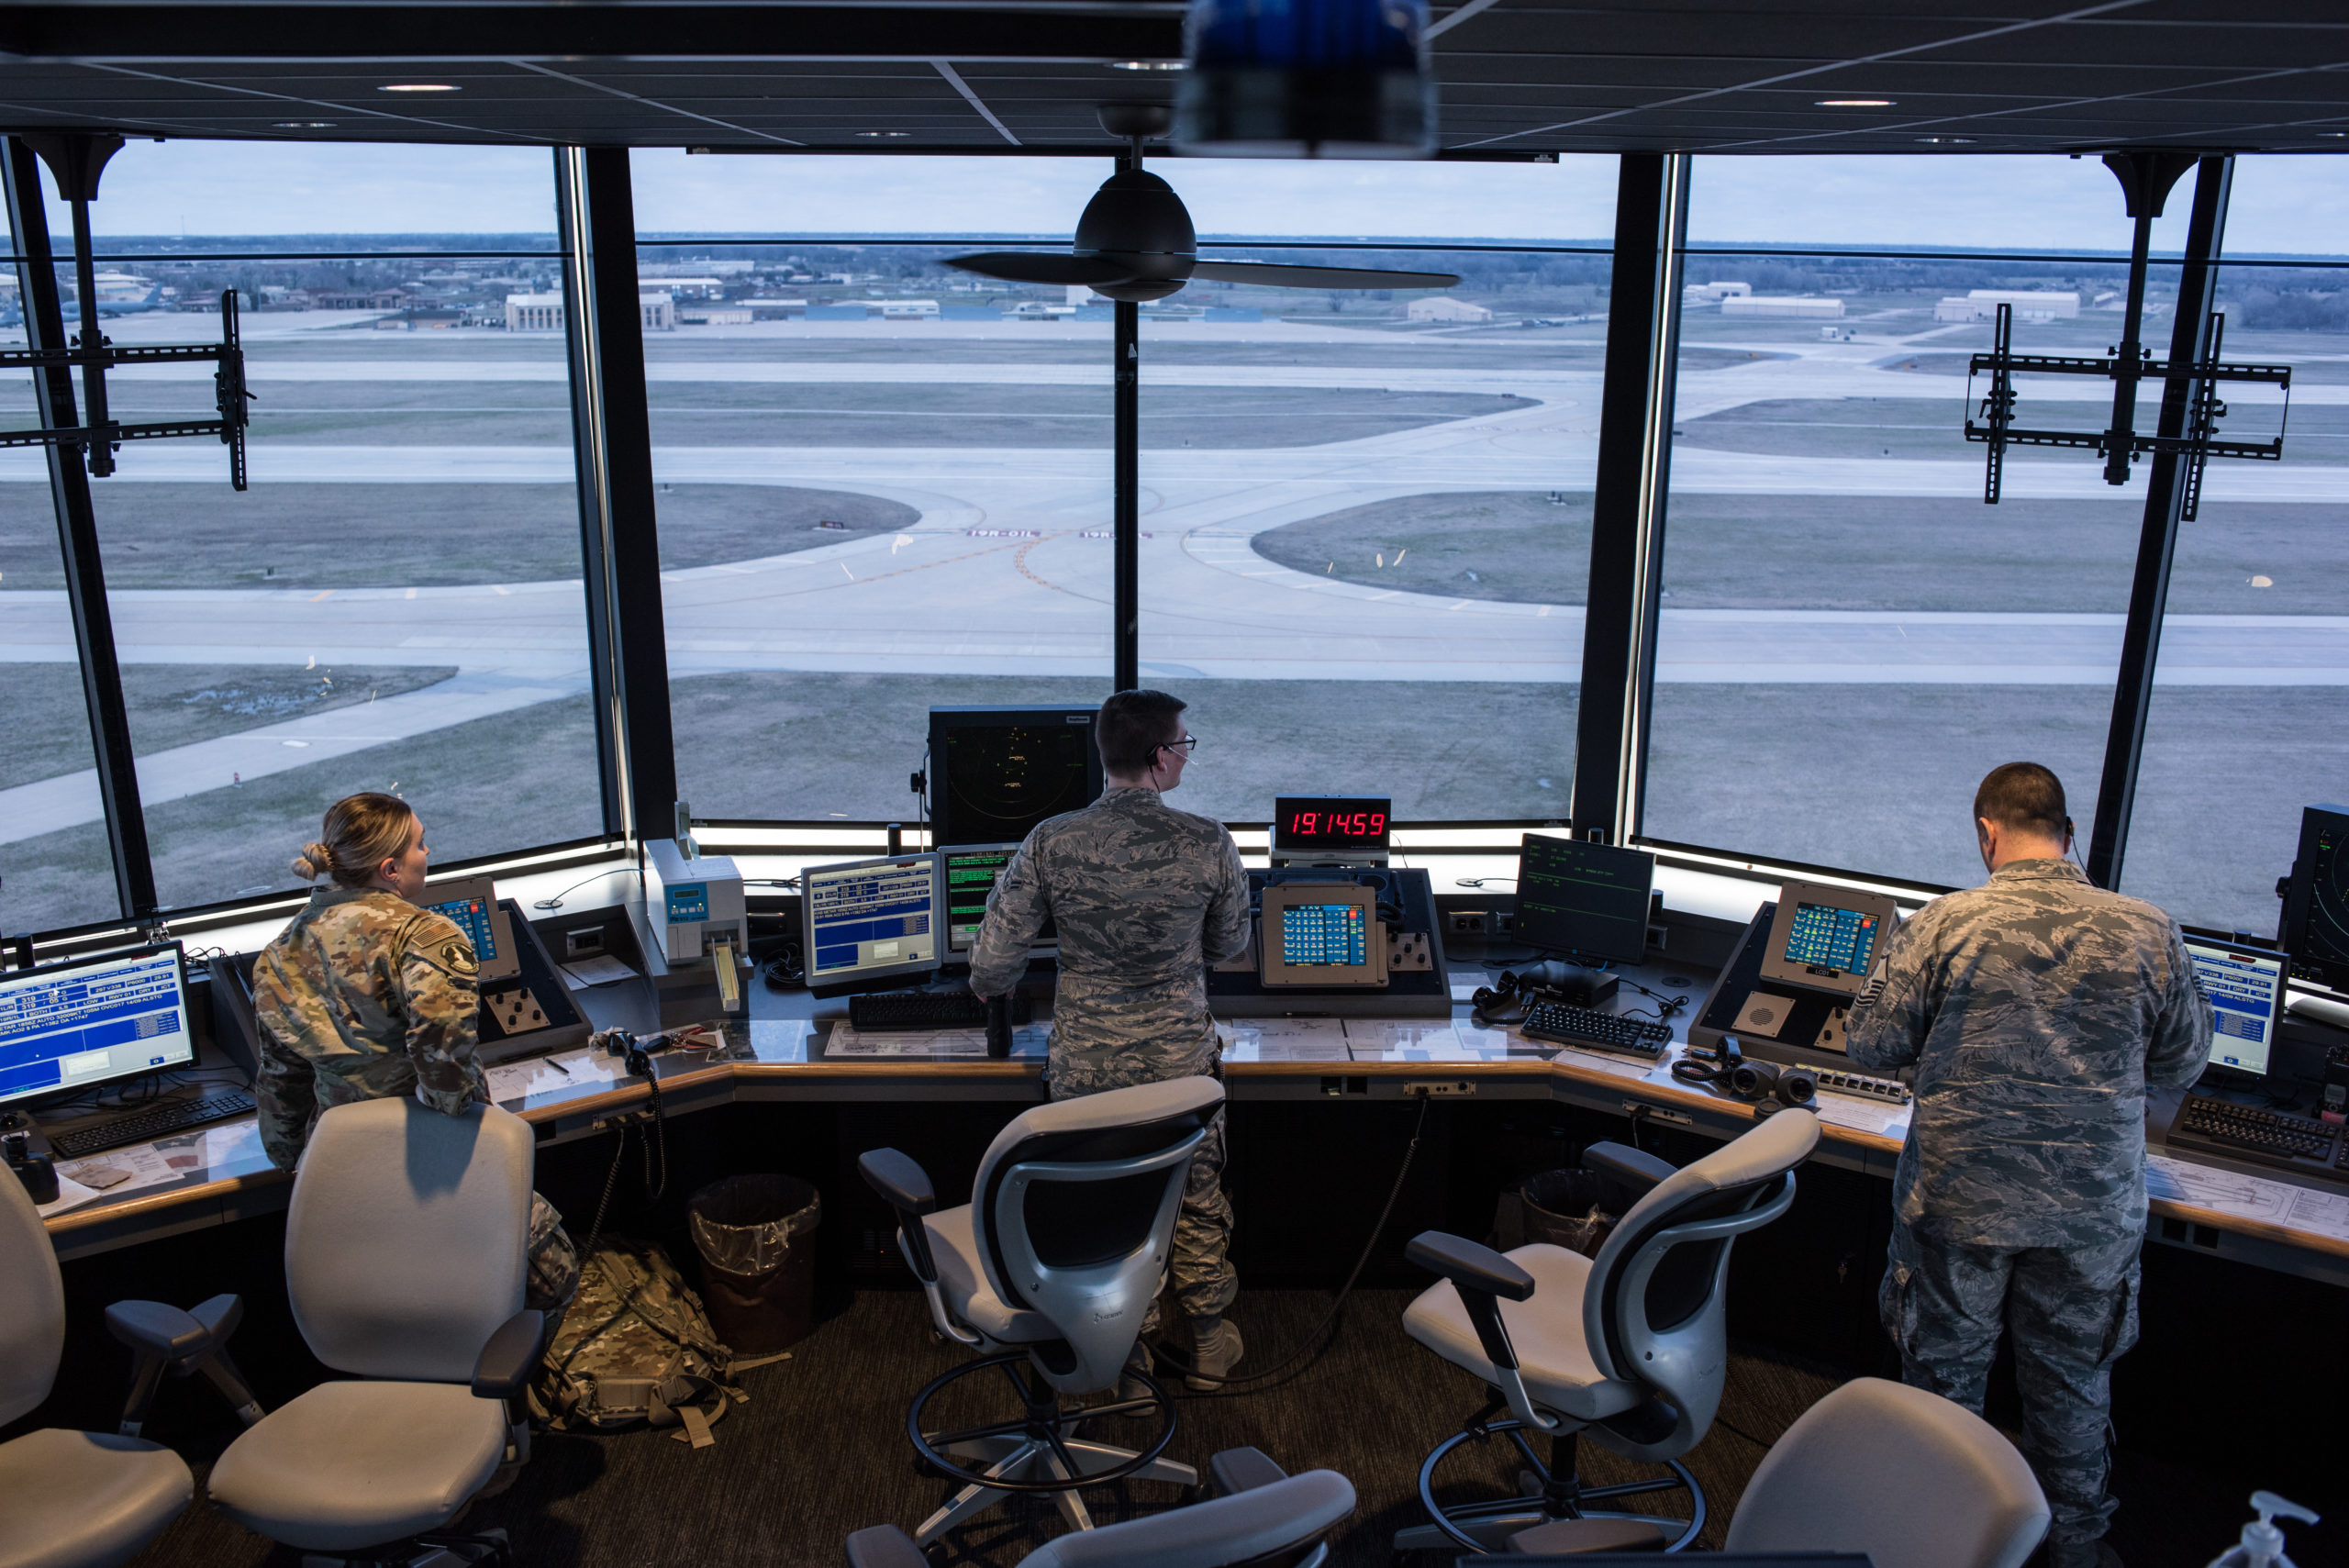 FAA Failure Causes Massive Flight Delays—Air Force Says Operations Unaffected